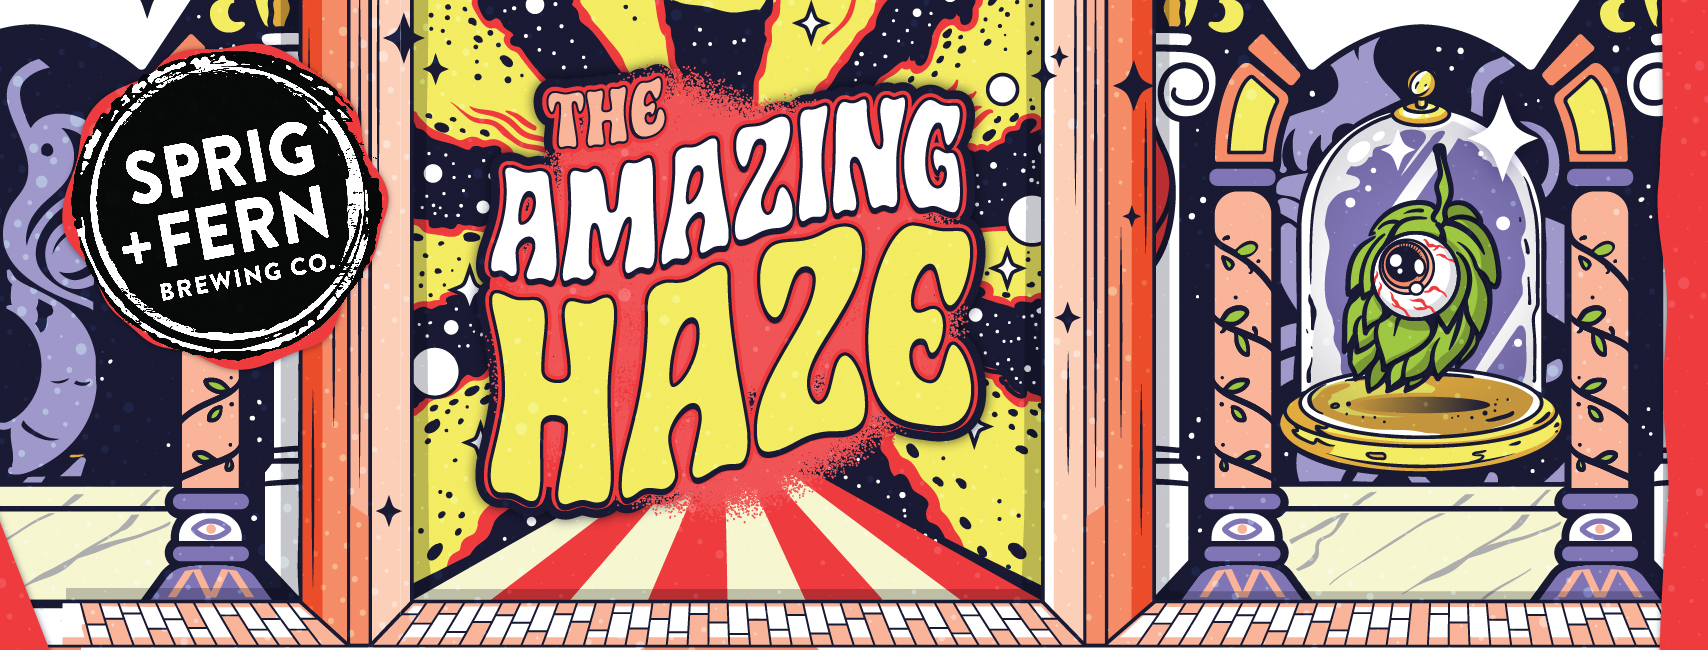 The artwork for Sprig and Fern The Amazing Haze hazy pale ale craft beer.